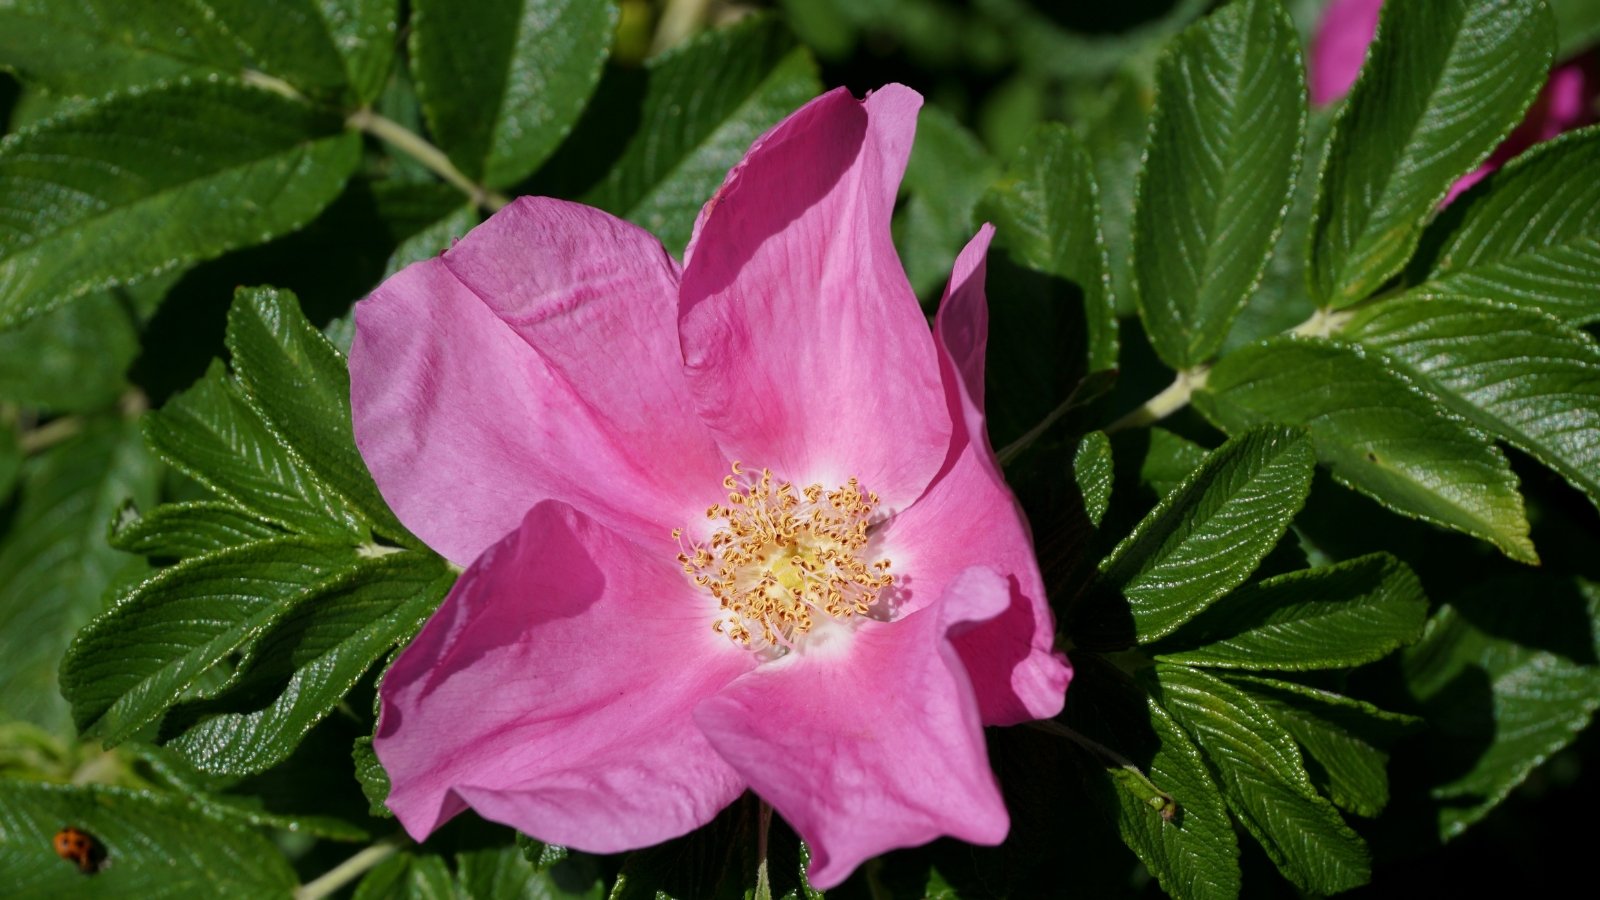 Rosa ‘Fru Dagmar Hastrup’ displays low, spreading stems, rugose, dark green leaves, and a single, silvery-pink flower with prominent yellow stamens.